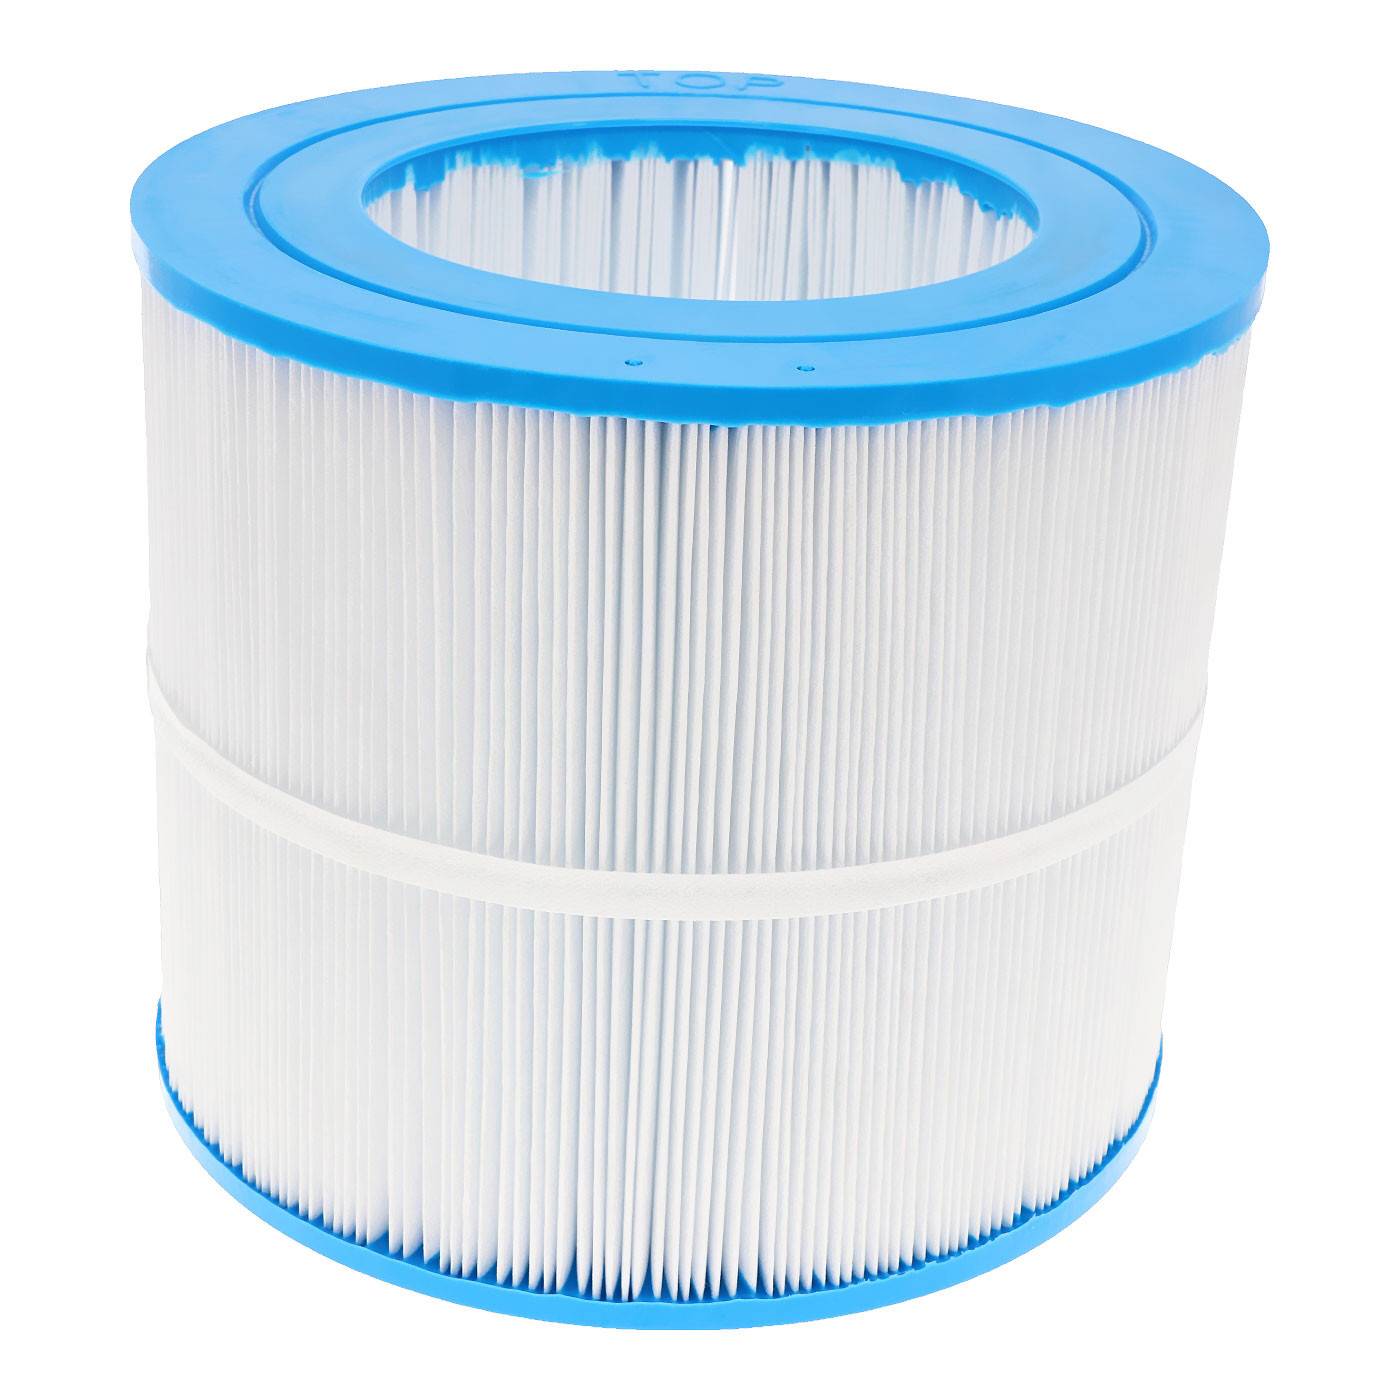 Filters Fast® FF-0684 Replacement Hot Tub Spa Filter Cartridge